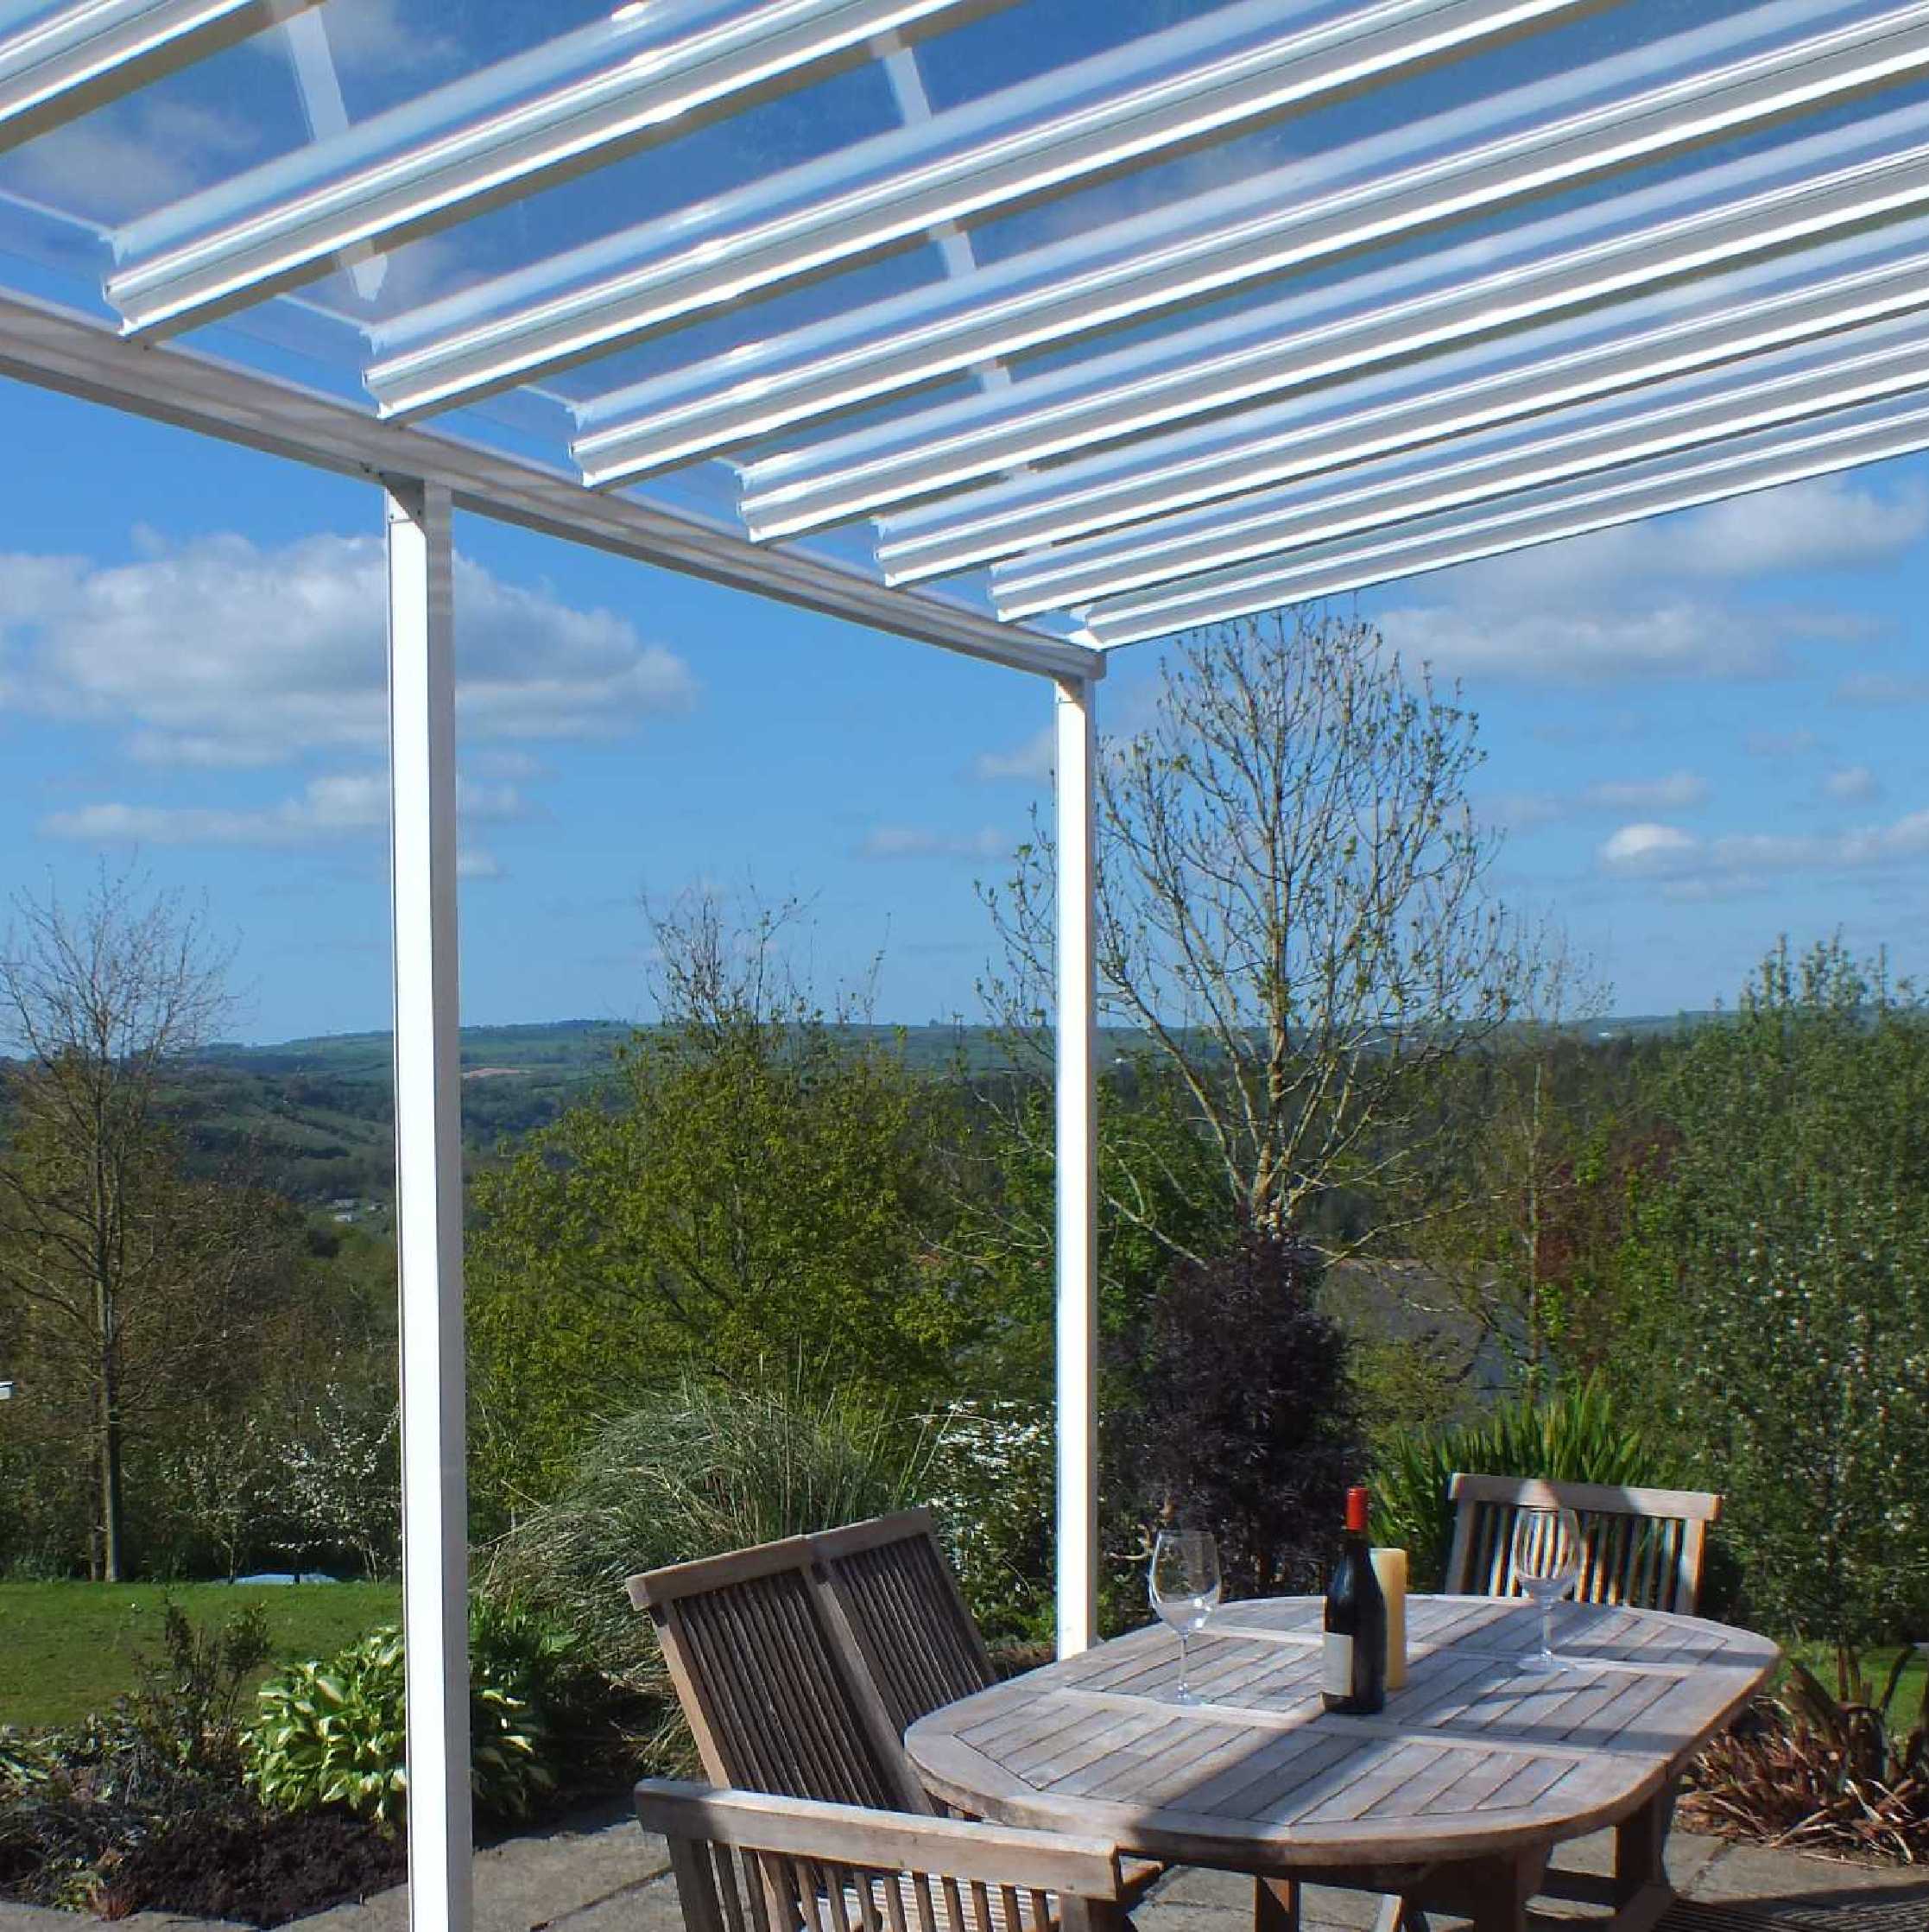 Buy Omega Smart Lean-To Canopy, White with 6mm Glass Clear Plate Polycarbonate Glazing - 7.7m (W) x 1.5m (P), (4) Supporting Posts online today